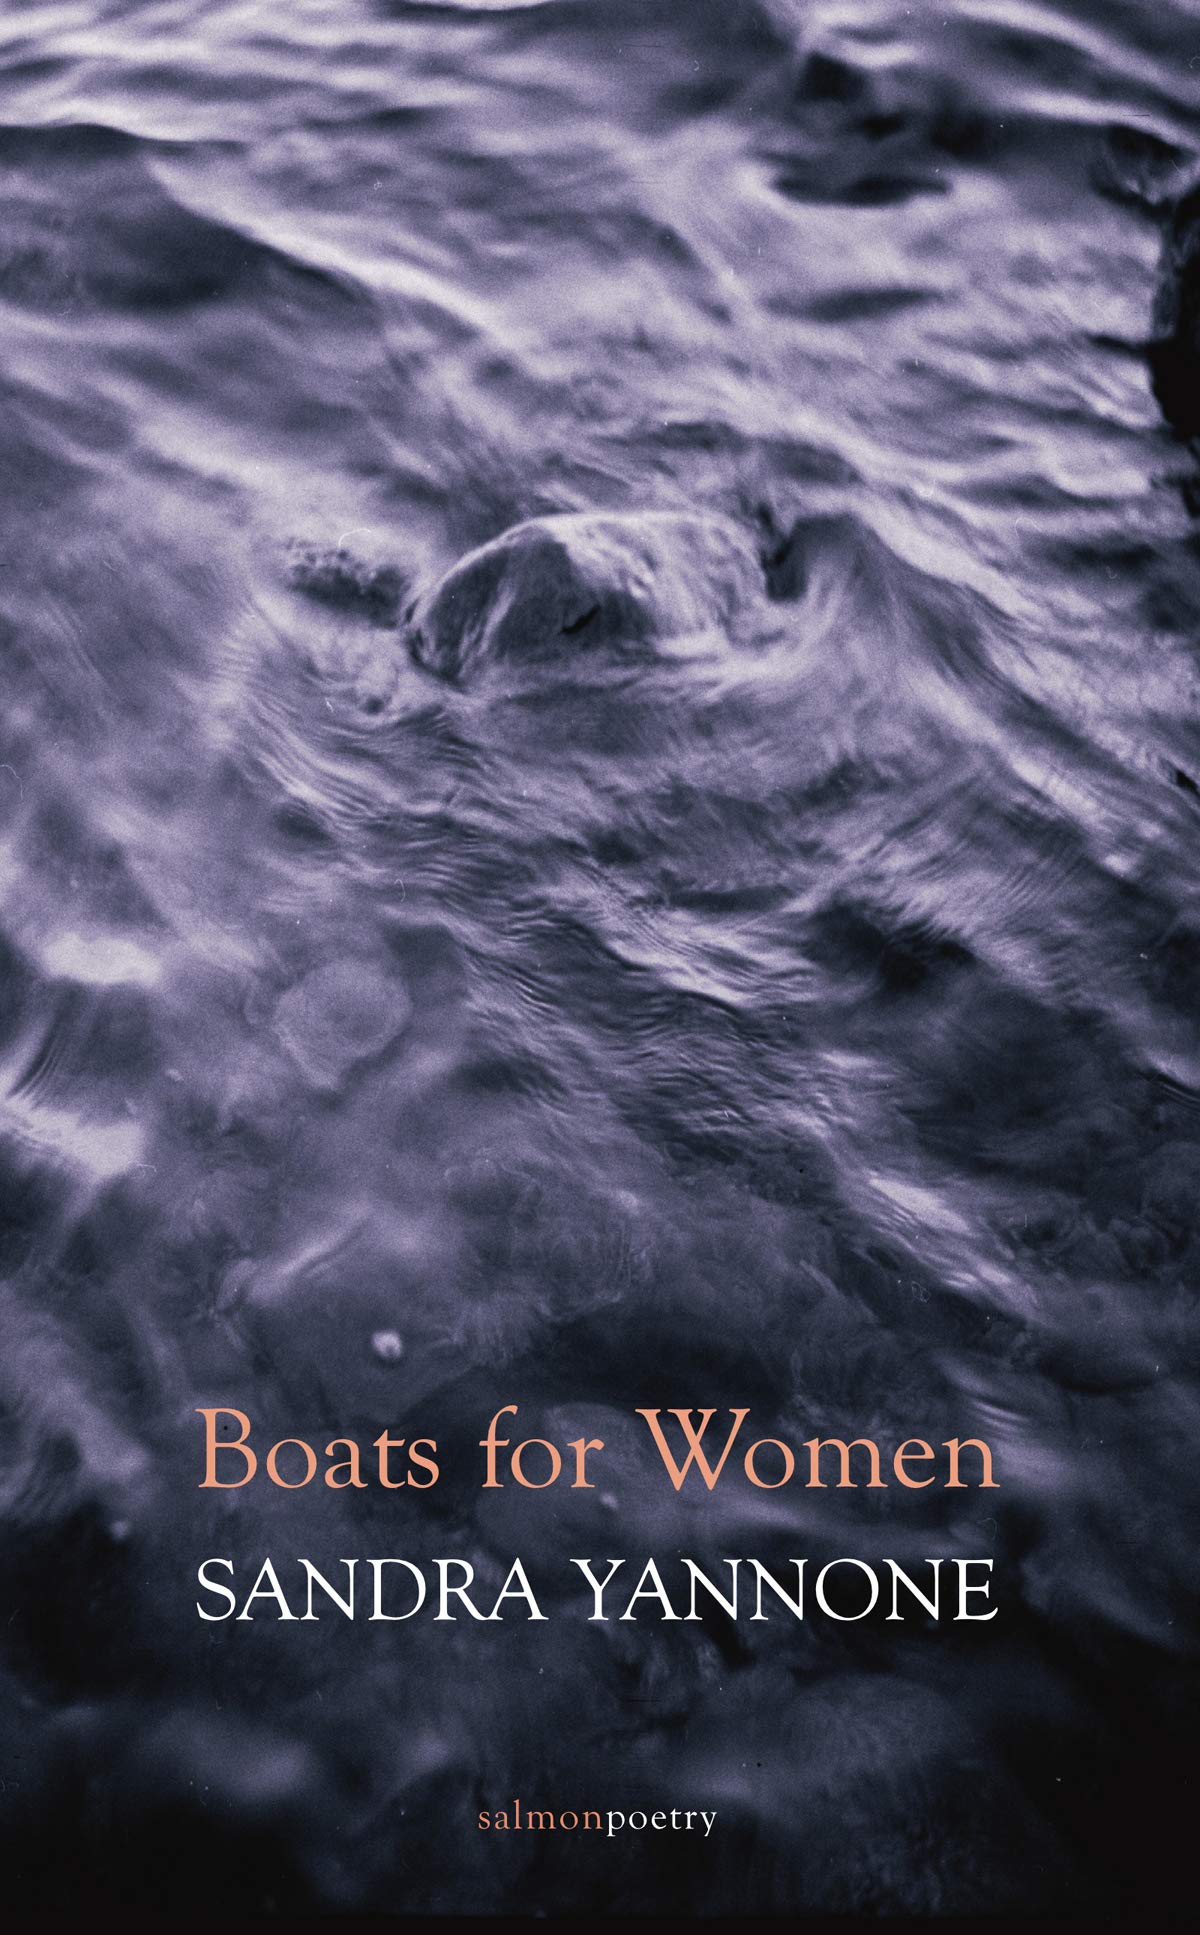 Bookcover for Boats for Women